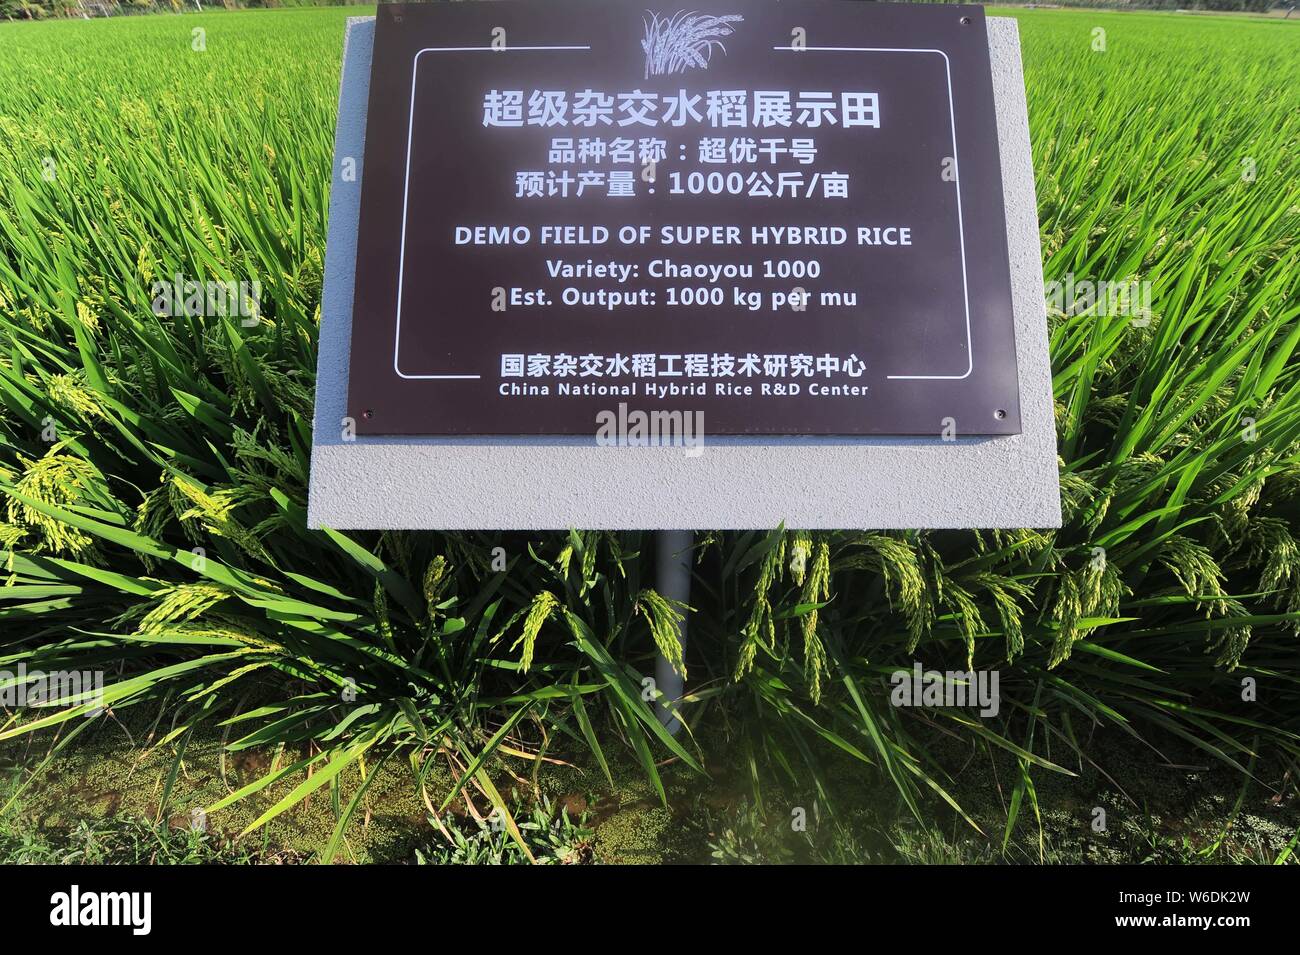 View of a demo field of super hybrid rice developed by Chinese agricultural scientist and educator Yuan Longping, known for developing the first hybri Stock Photo